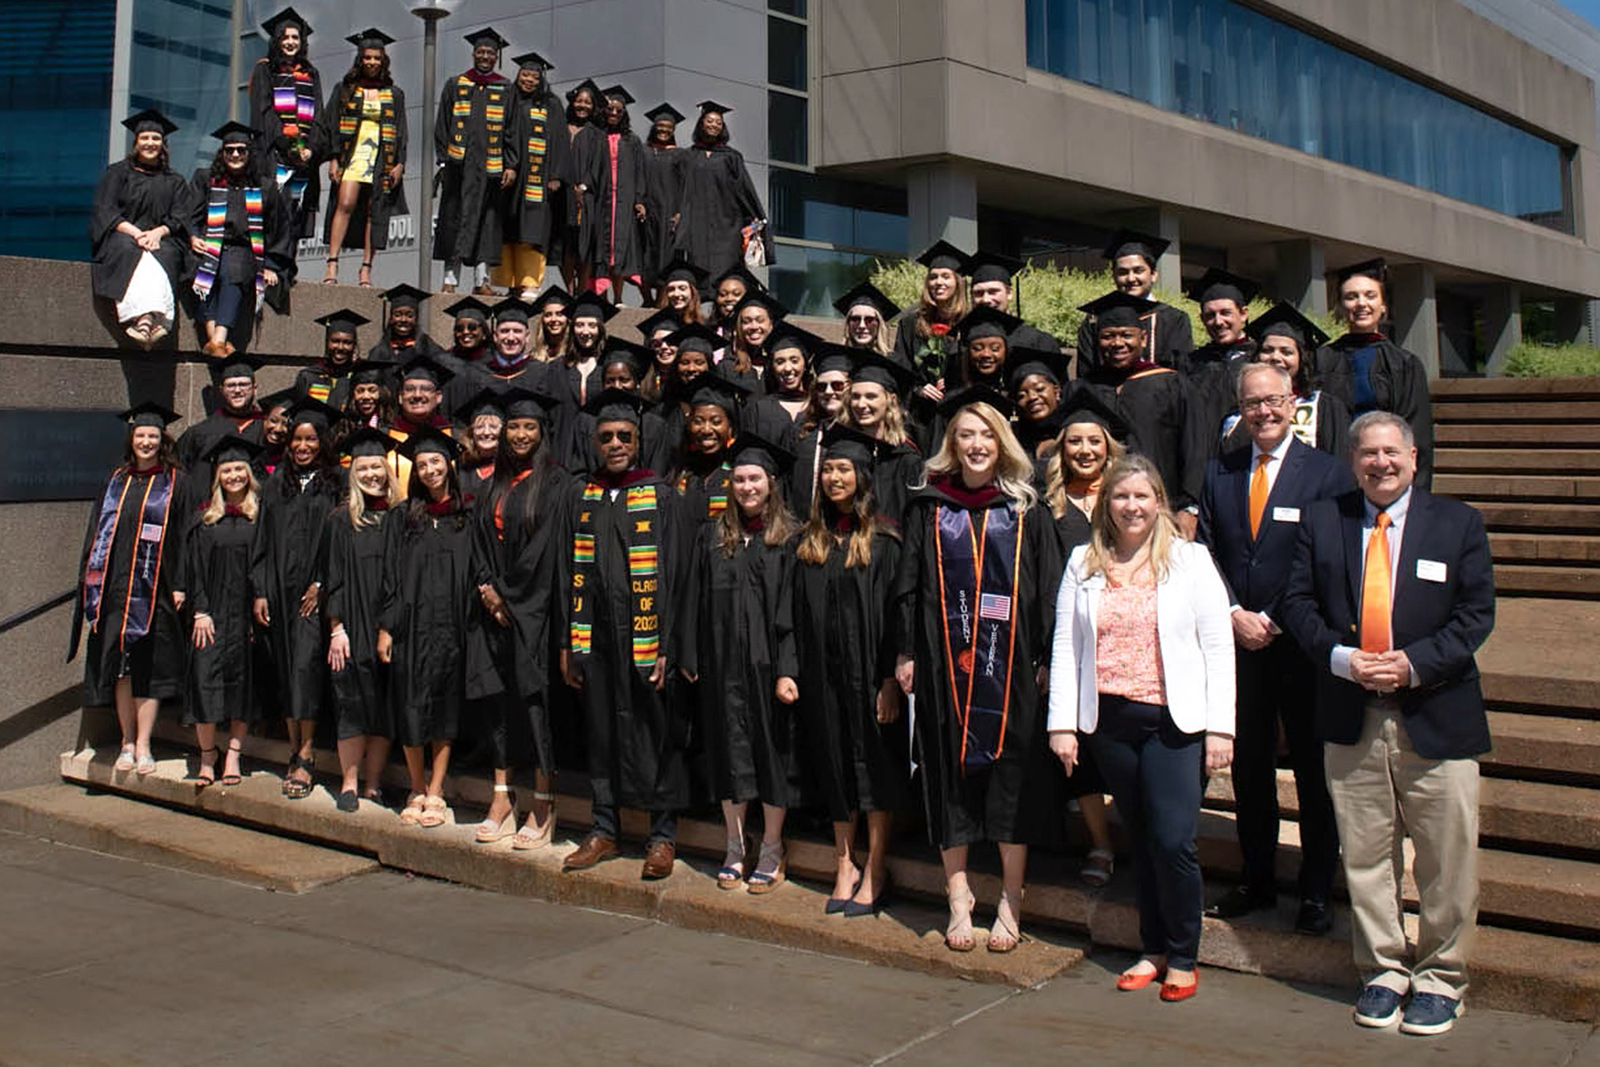 Graduates pose for a photo in academic regalia on the steps of the Newhouse School